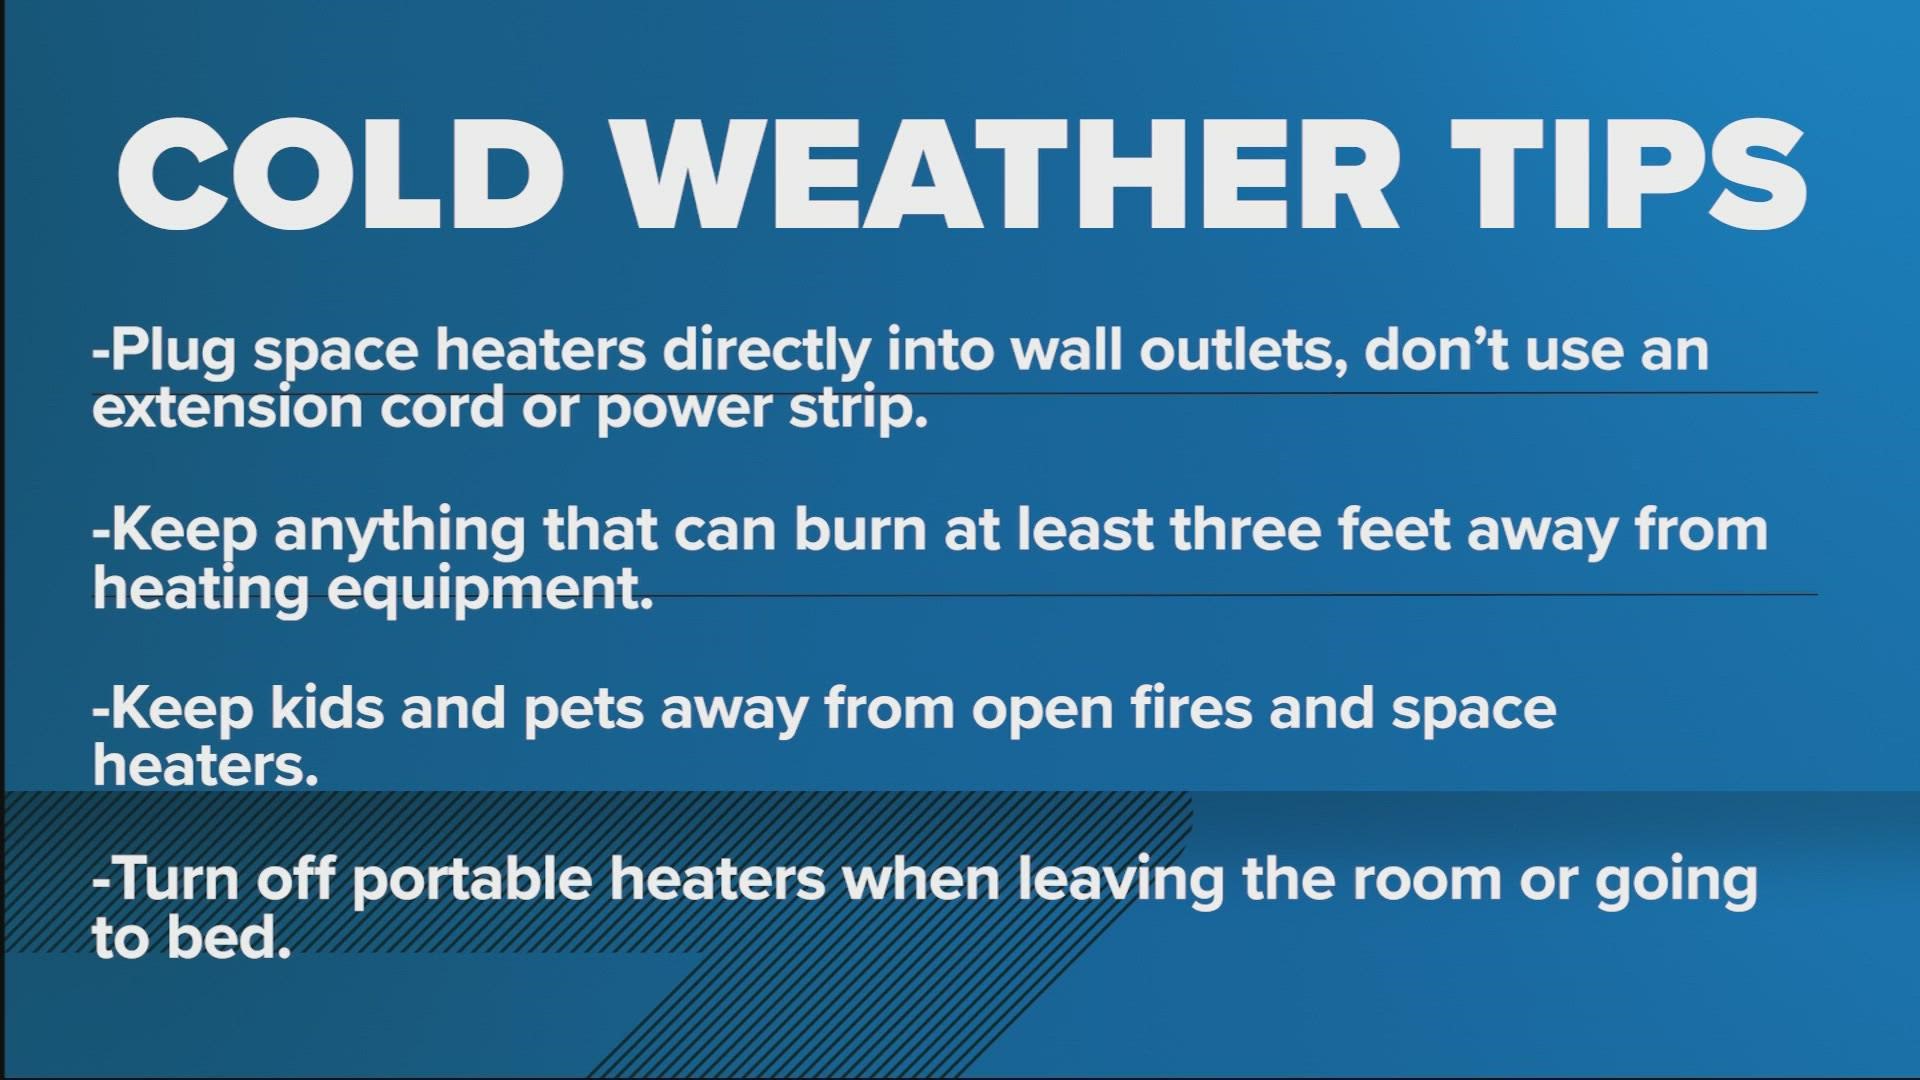 Winter temperatures are finally coming and the Harris County Fire Marshal's Office and Houston SPCA want to make sure you and your family are safe.